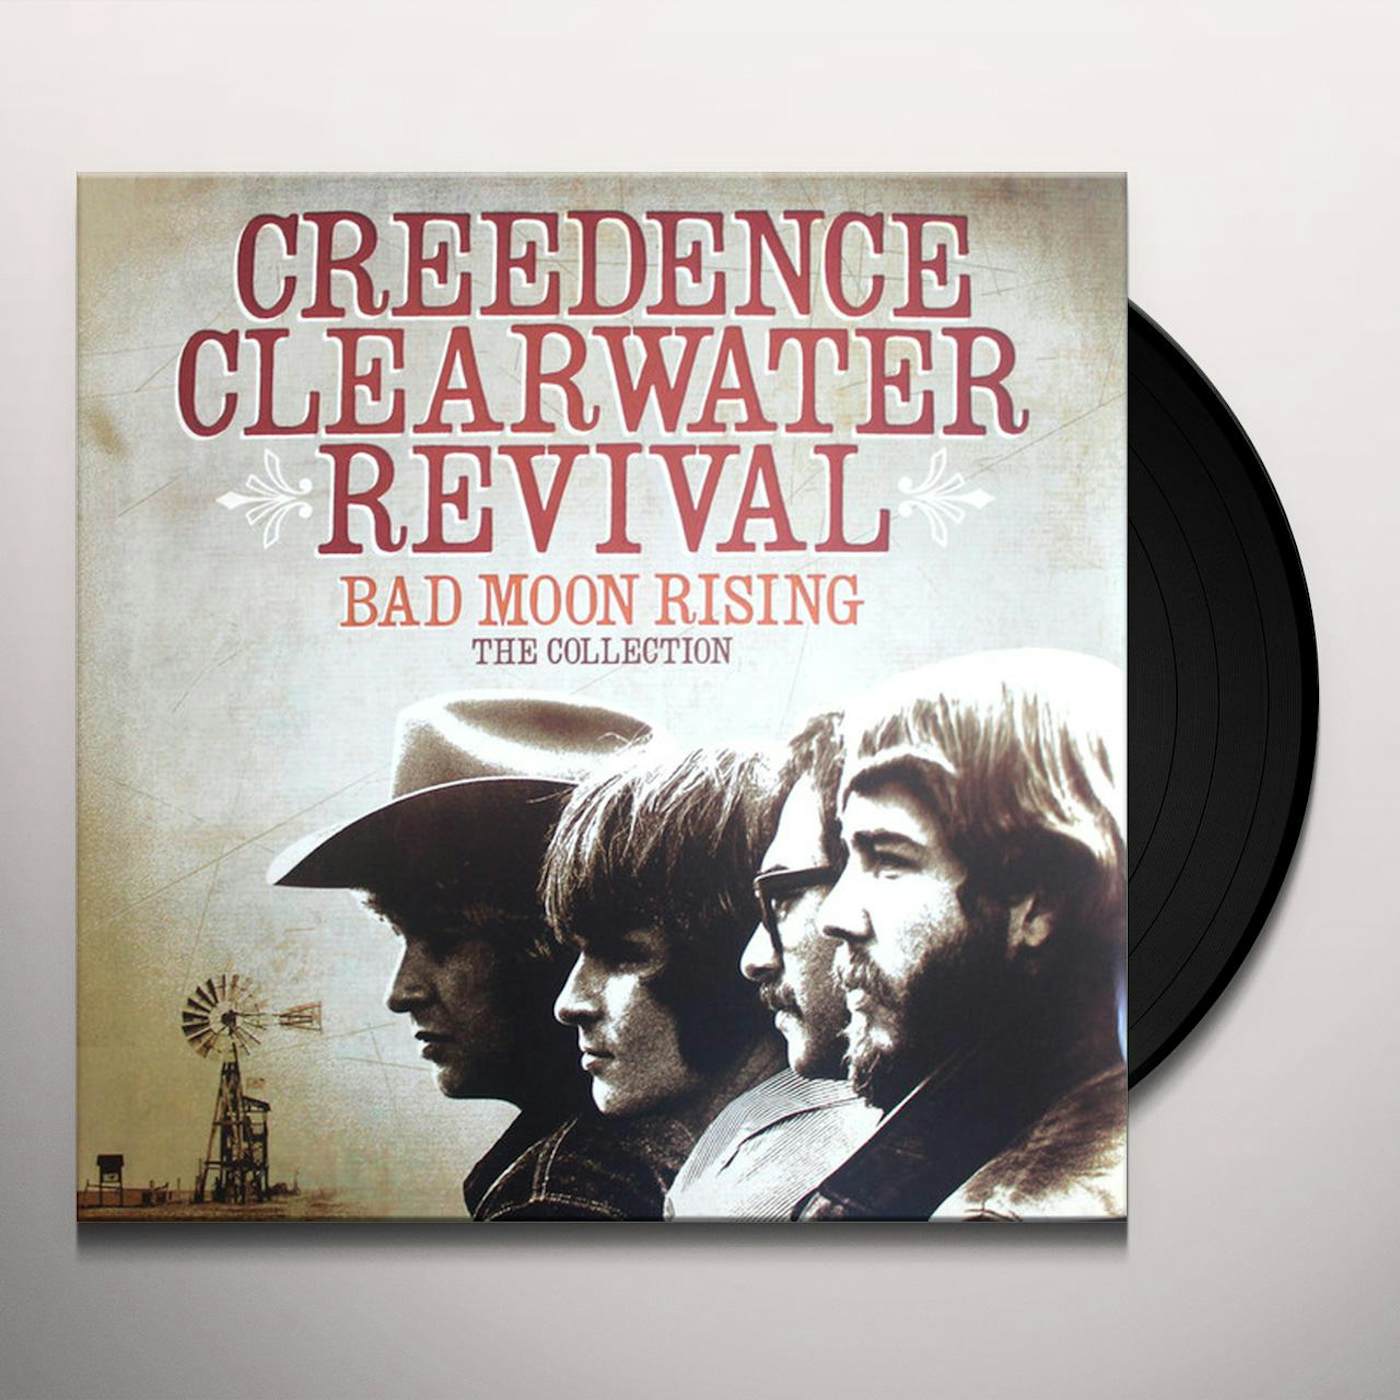 Creedence Clearwater Revival BAD MOON RISING: THE COLLECTION Vinyl Record